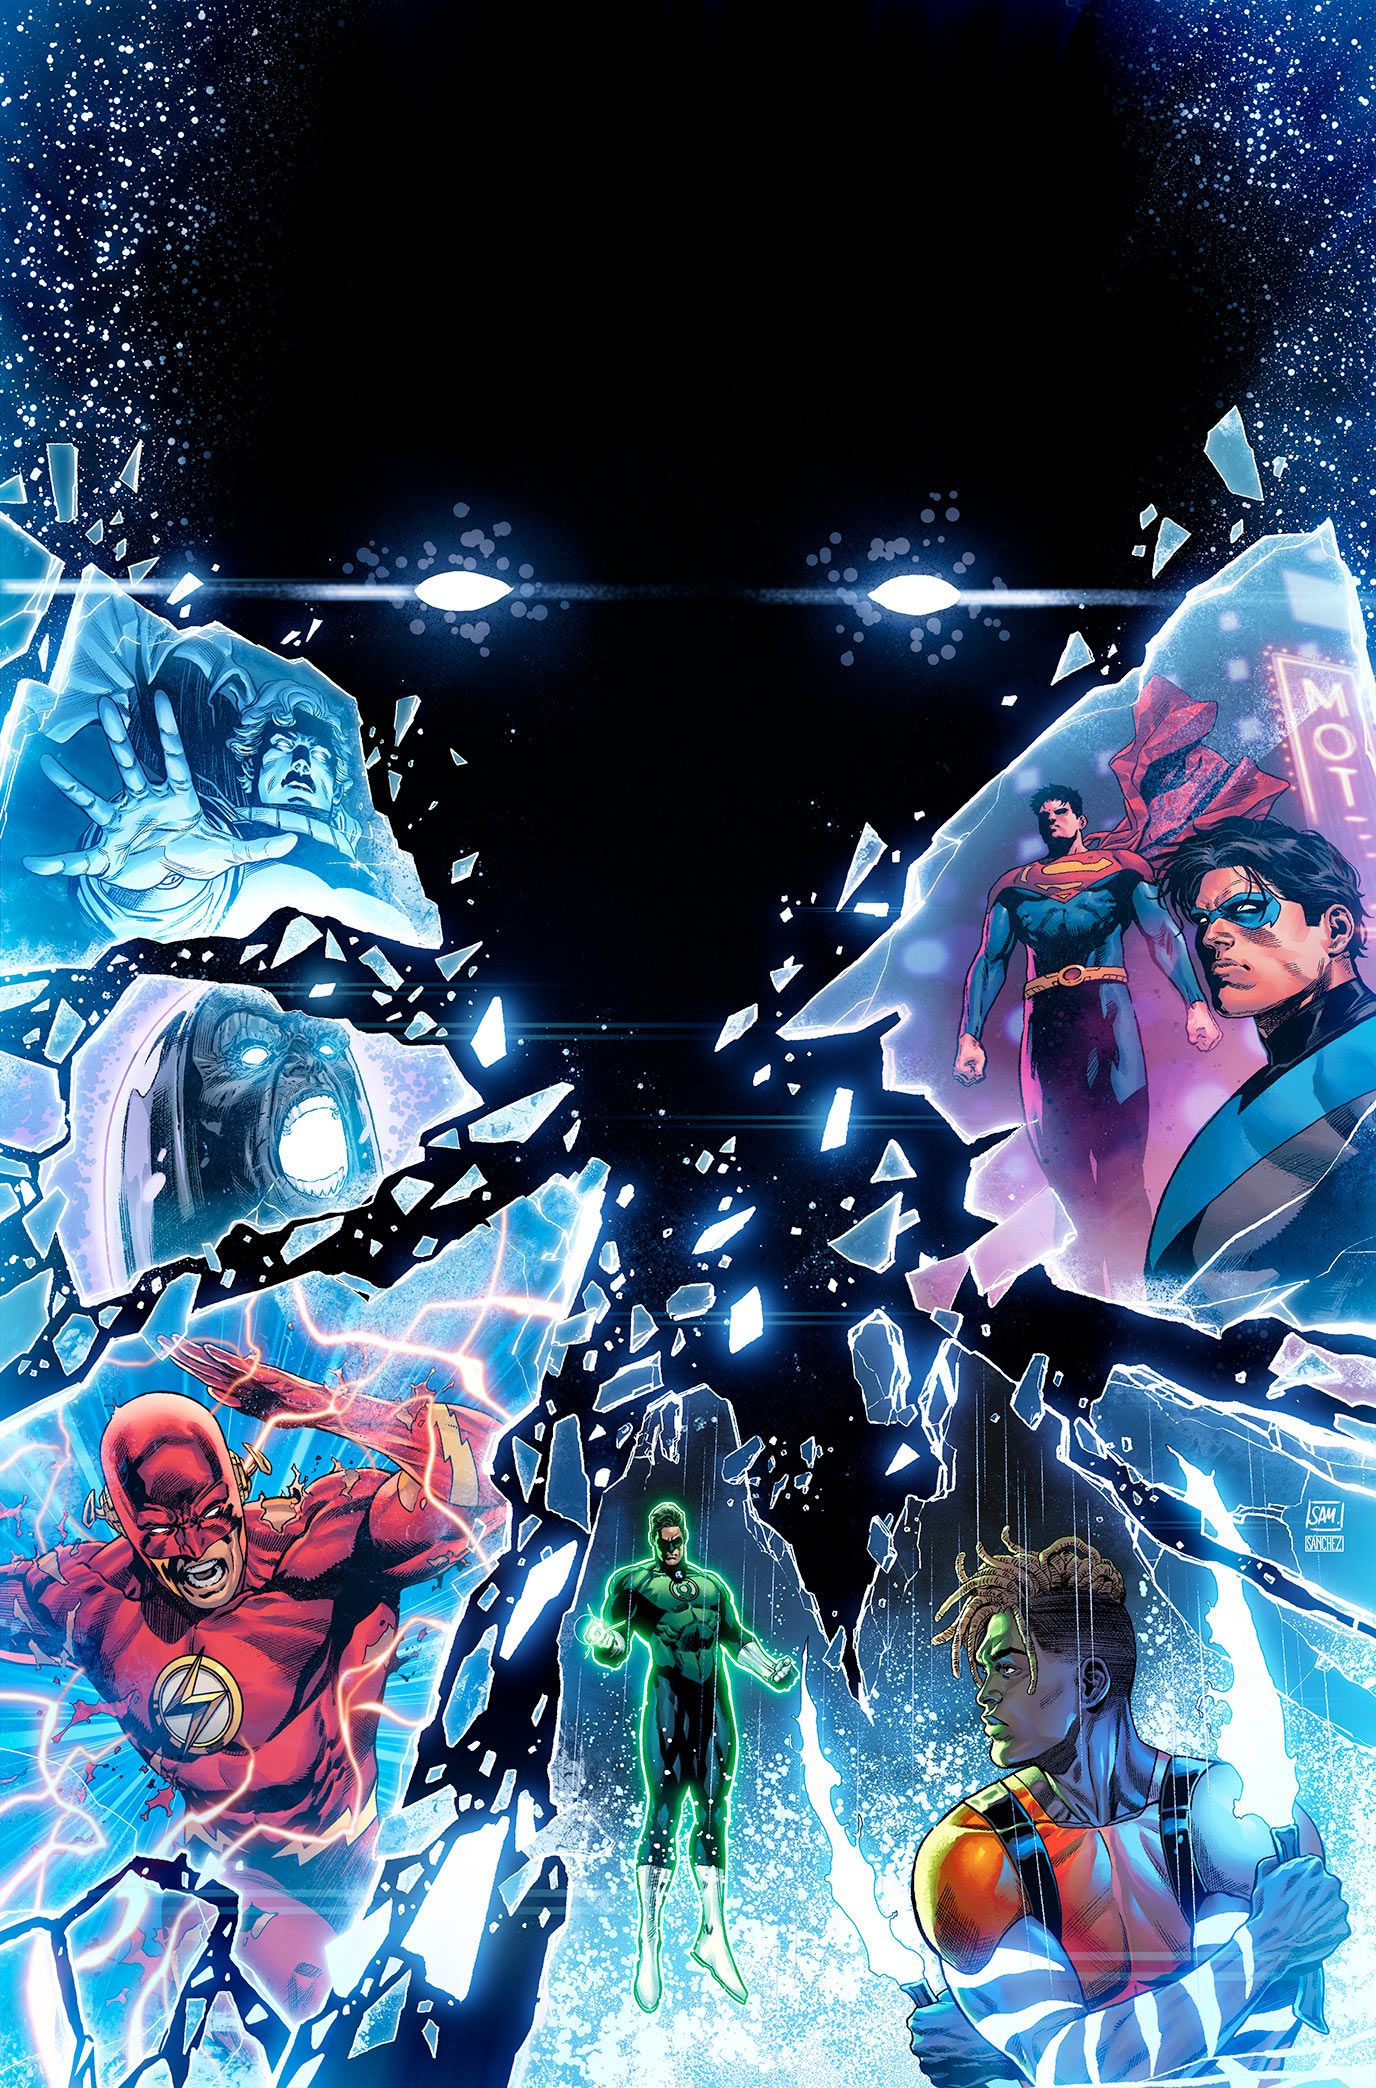 JUSTICE LEAGUE: ROAD TO DARK CRISIS #1 COVER